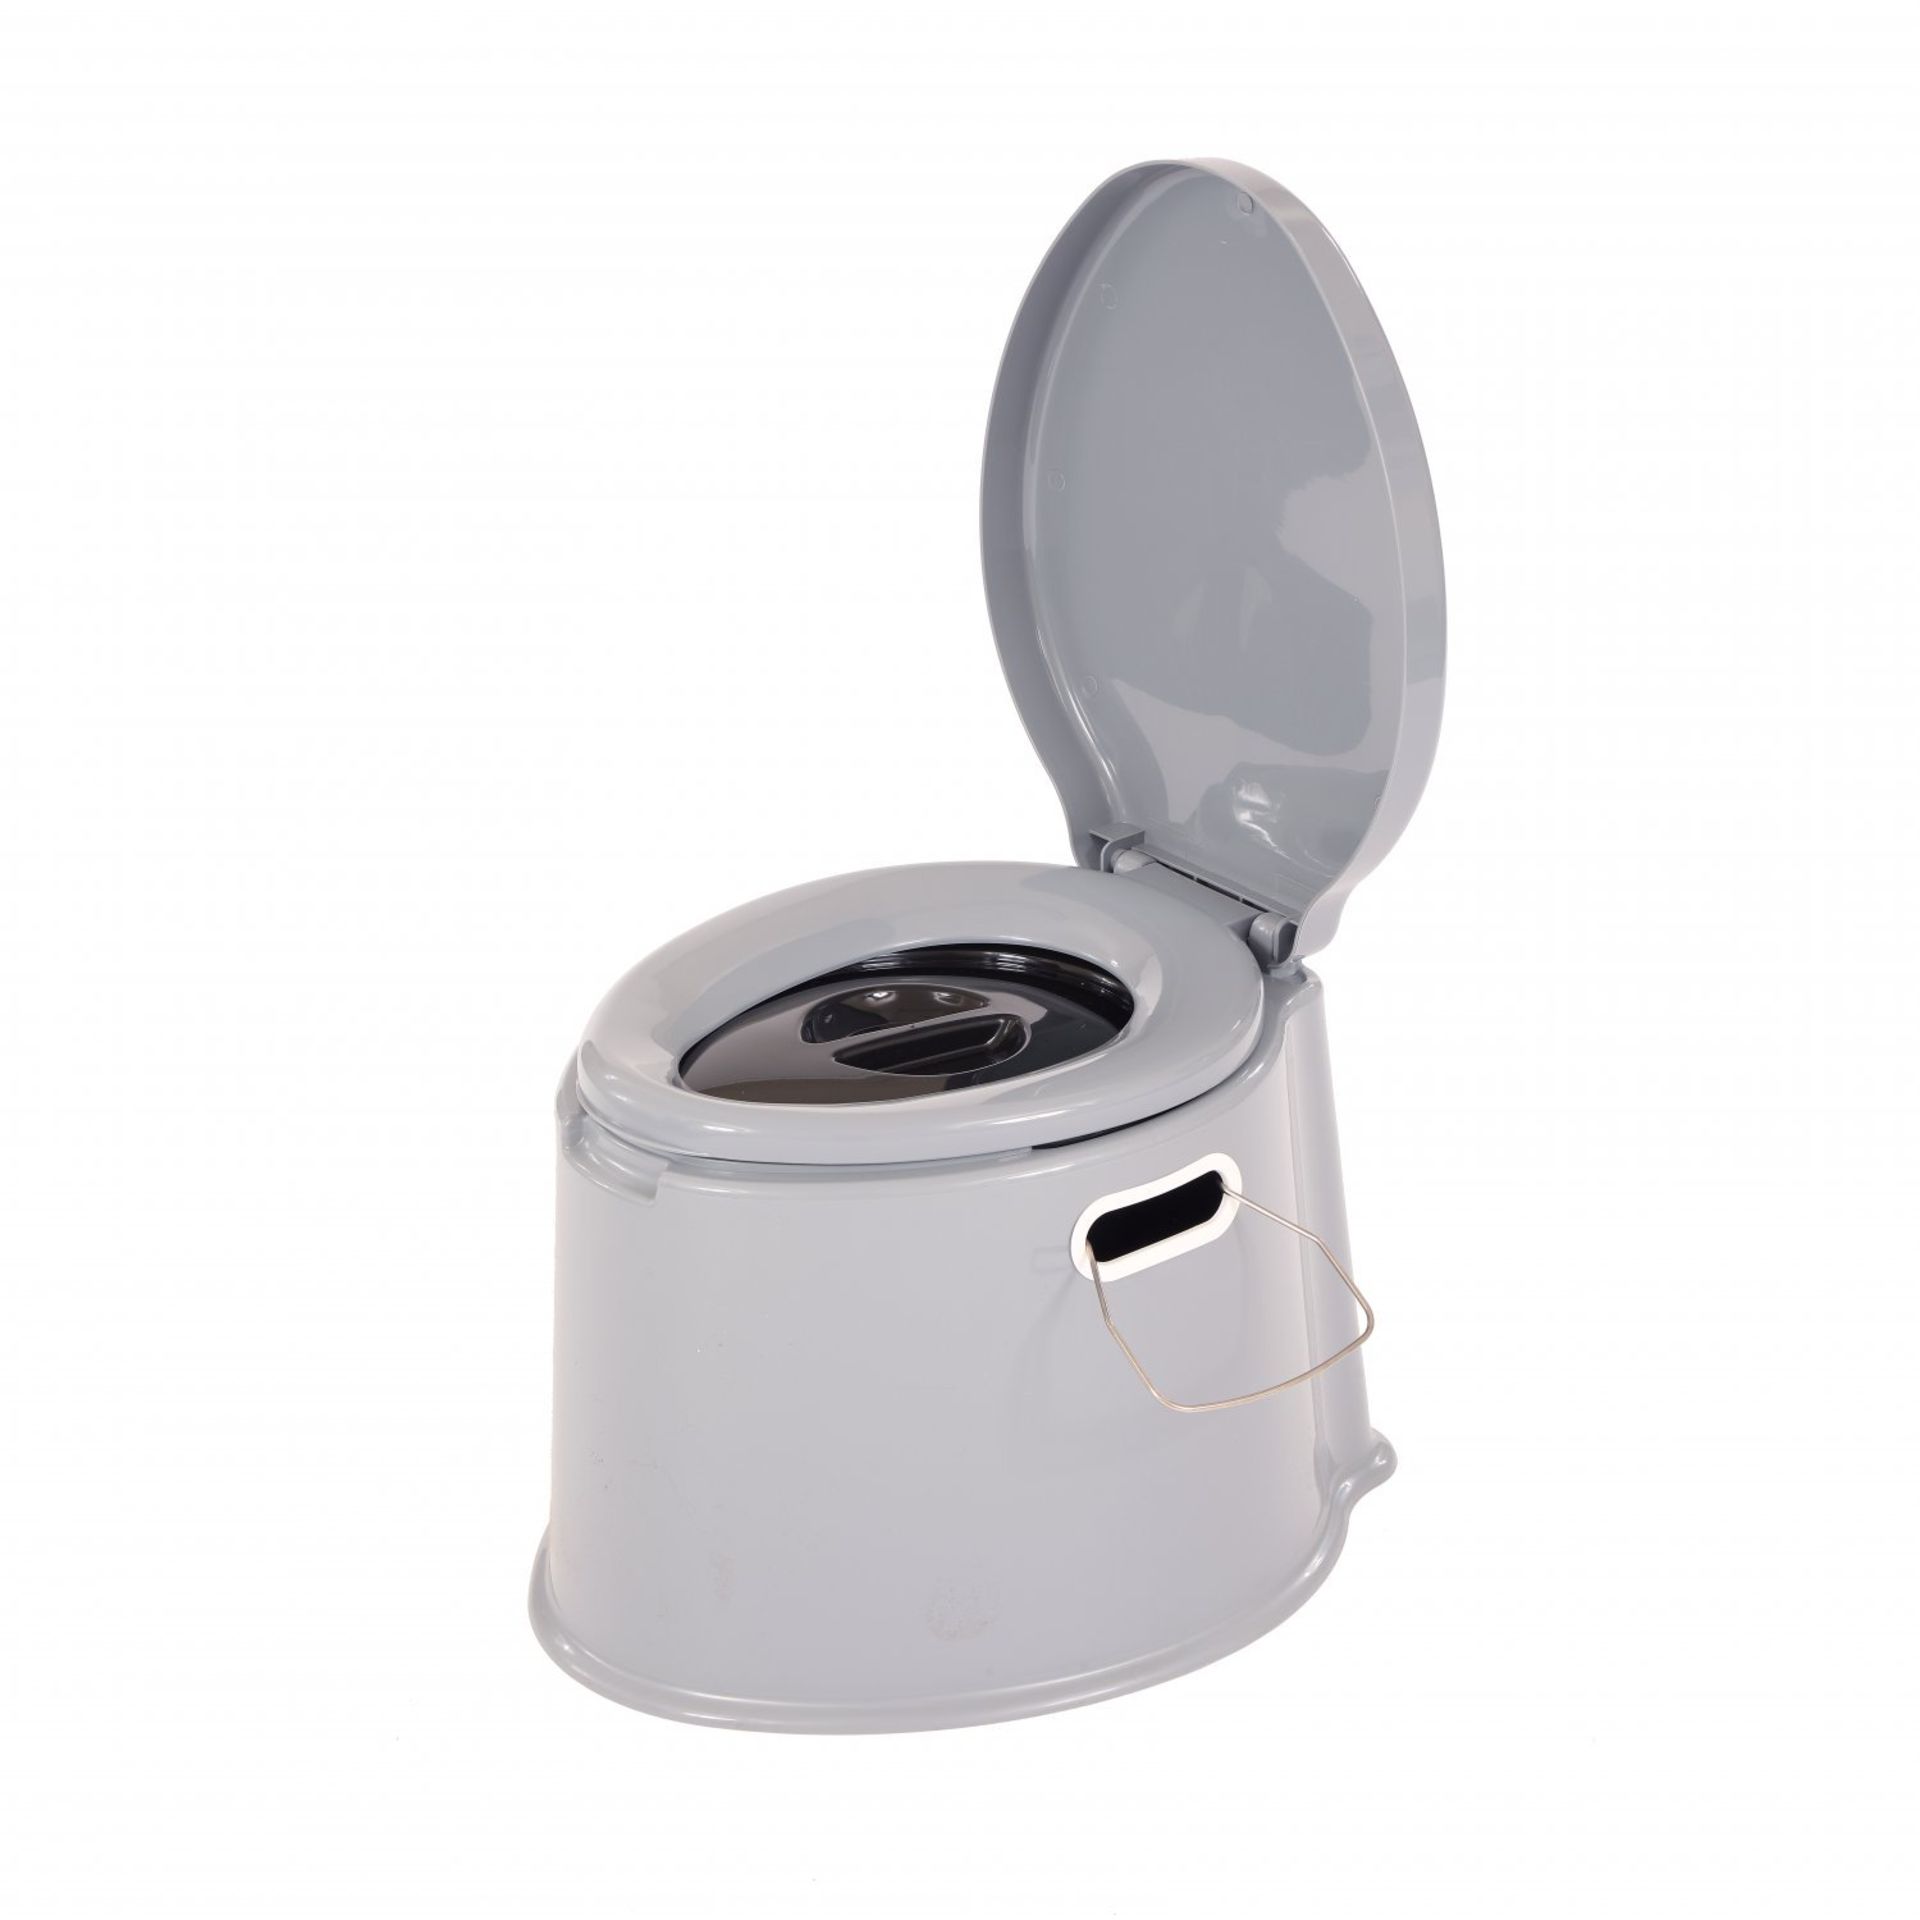 (G4) 5L Portable Compact Camping Toilet Potty with Removable Bucket Dimensions: 43 x 39 x 34cm...